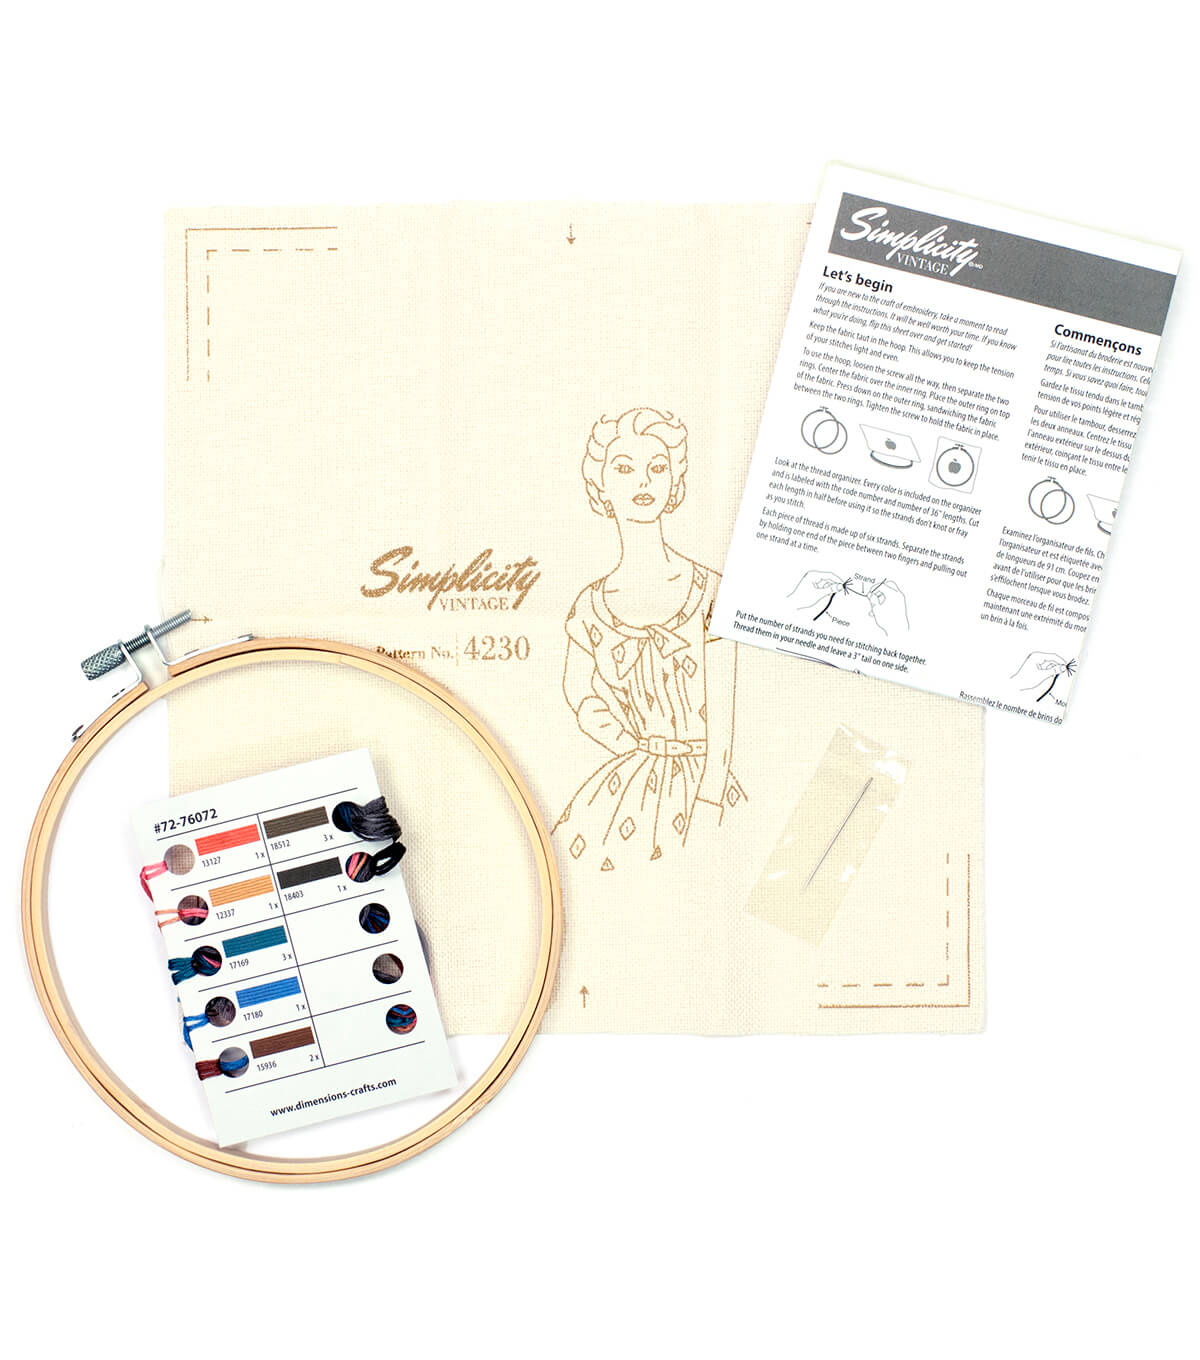 SIMPLICITY VINTAGE EMBROIDERY KIT